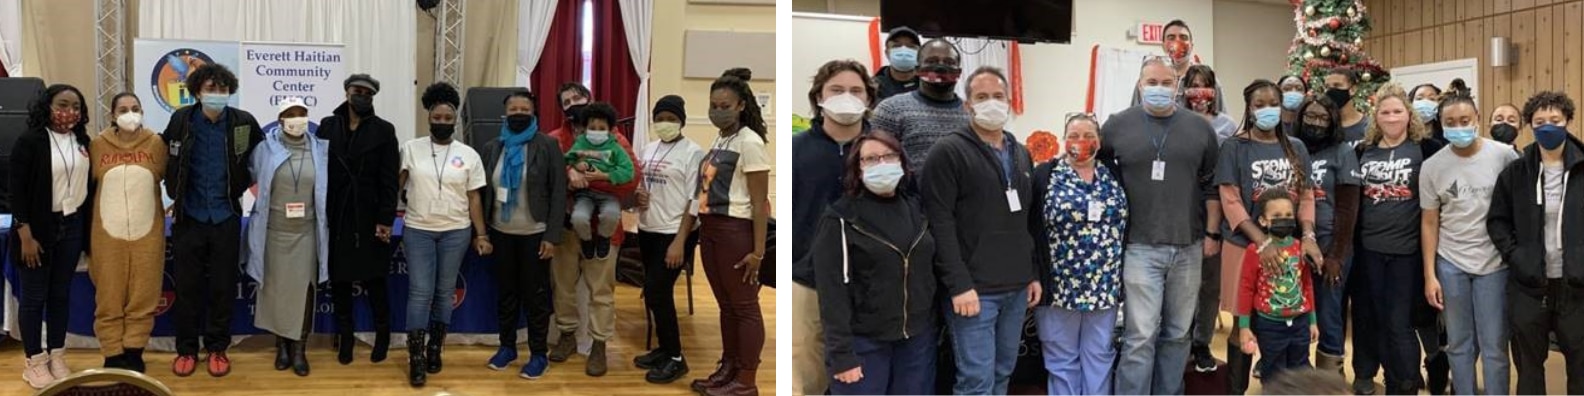 Groups of people in masks at vaccination clinic events in Everett and Brockton